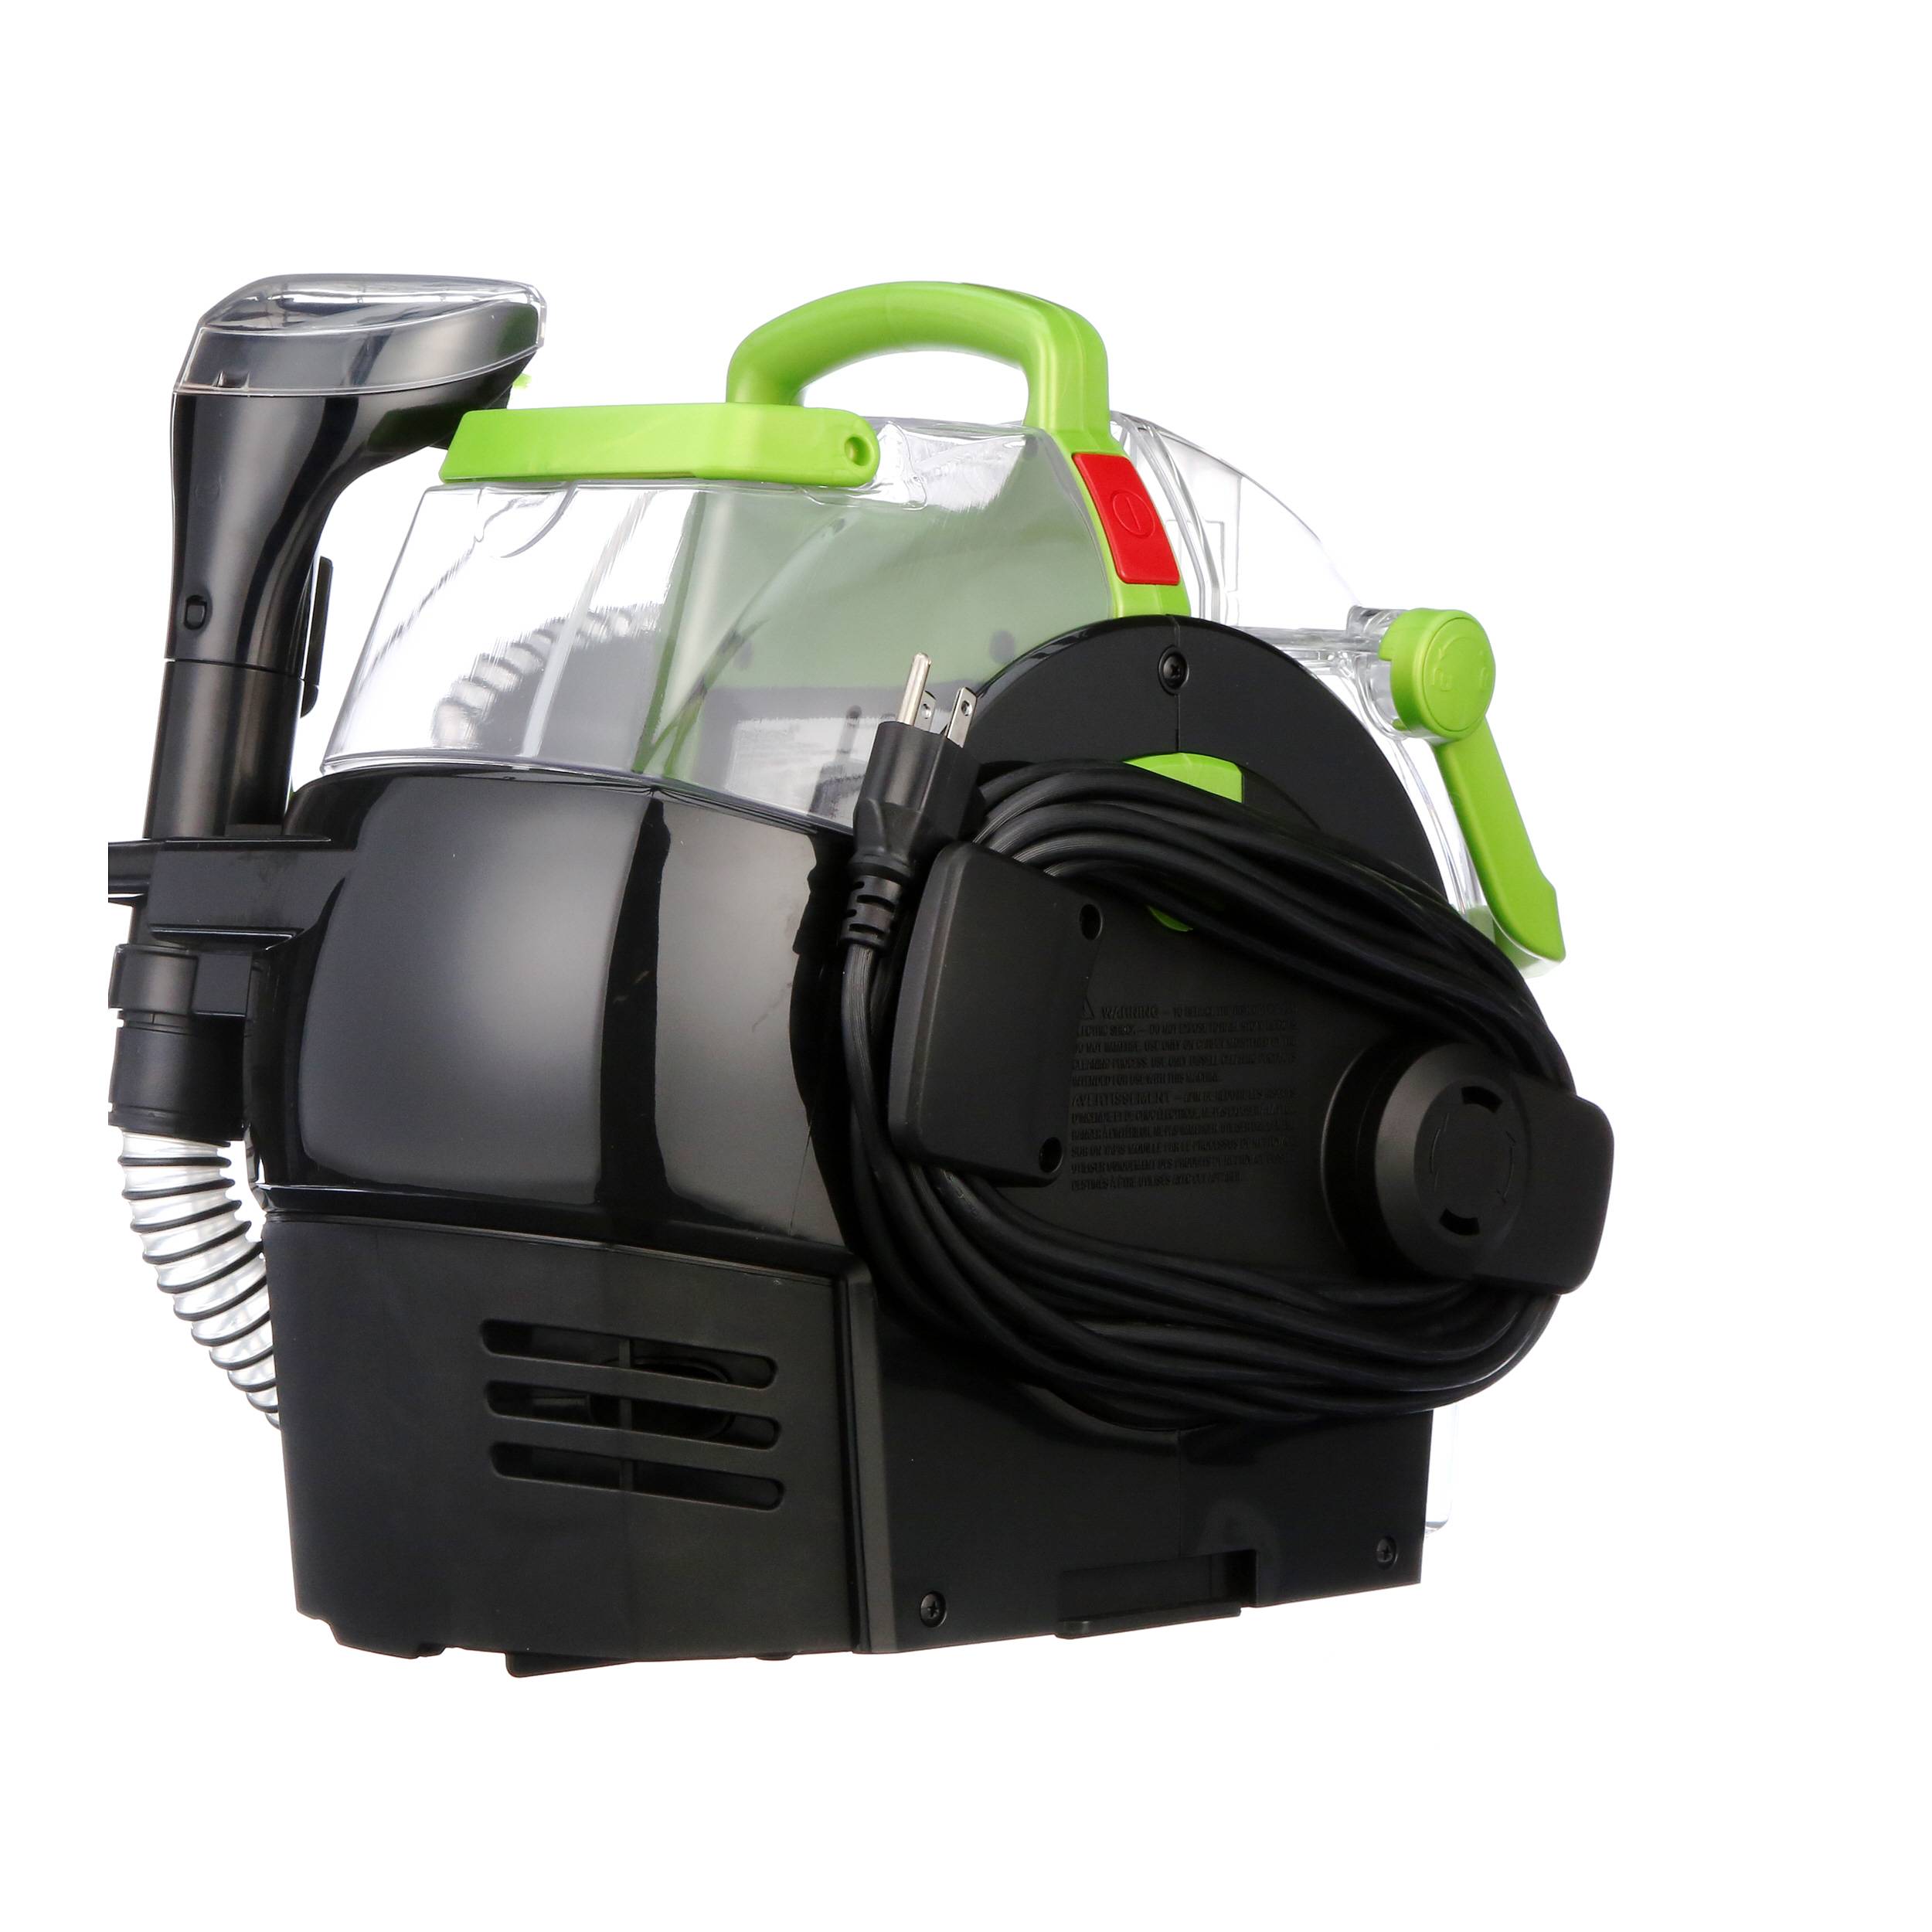 Bissell's Famous Little Green Machine Is on Sale at Walmart